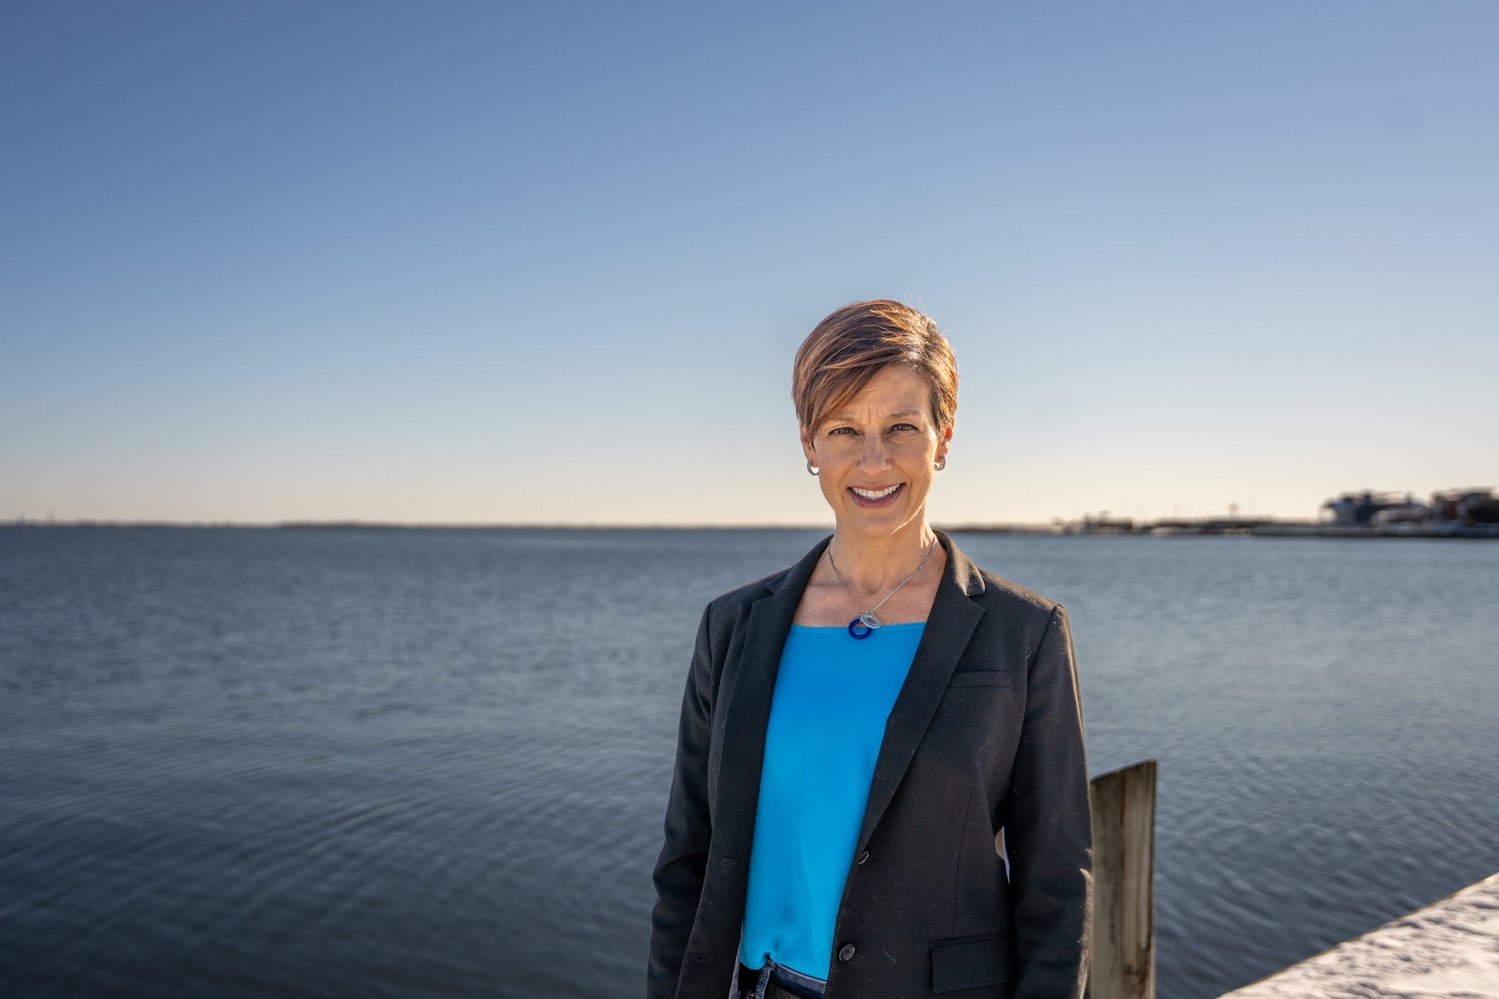 Robyn Silvestri of Save The Great South Bay was chosen as the 2022 Inspiration Award winner.